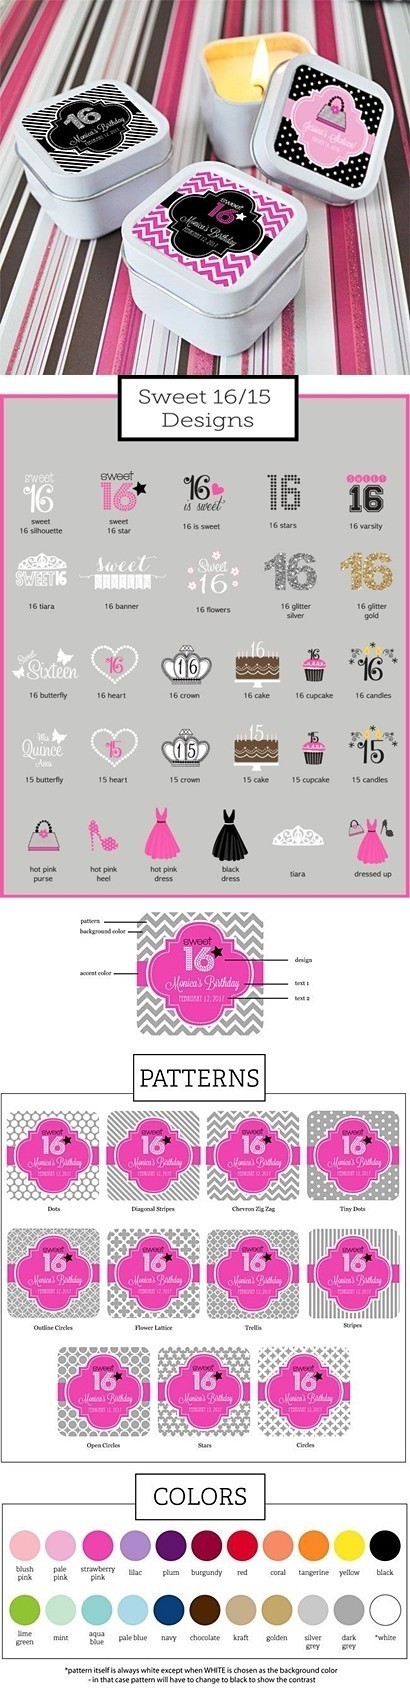 Cute Quinceañera/Sweet 16 Square Candle Tins